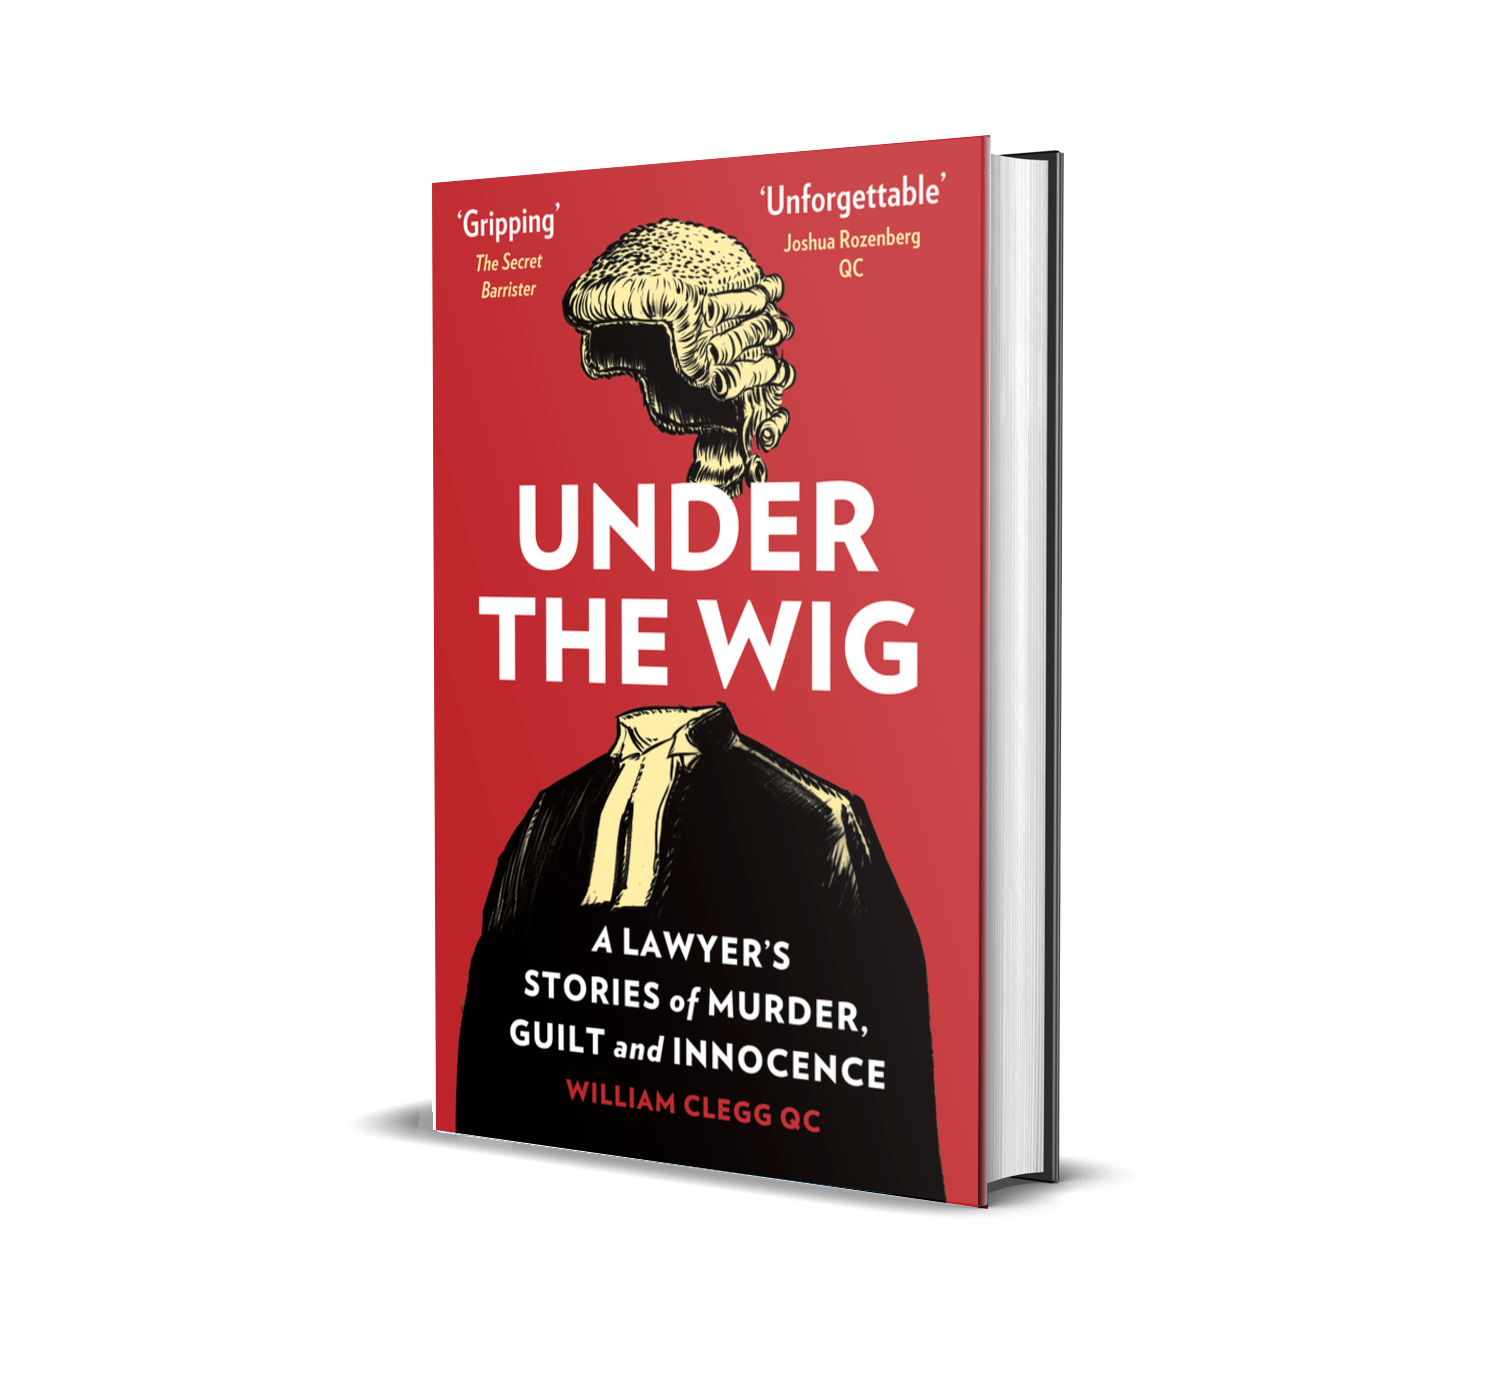 Under the Wig by William Clegg QC